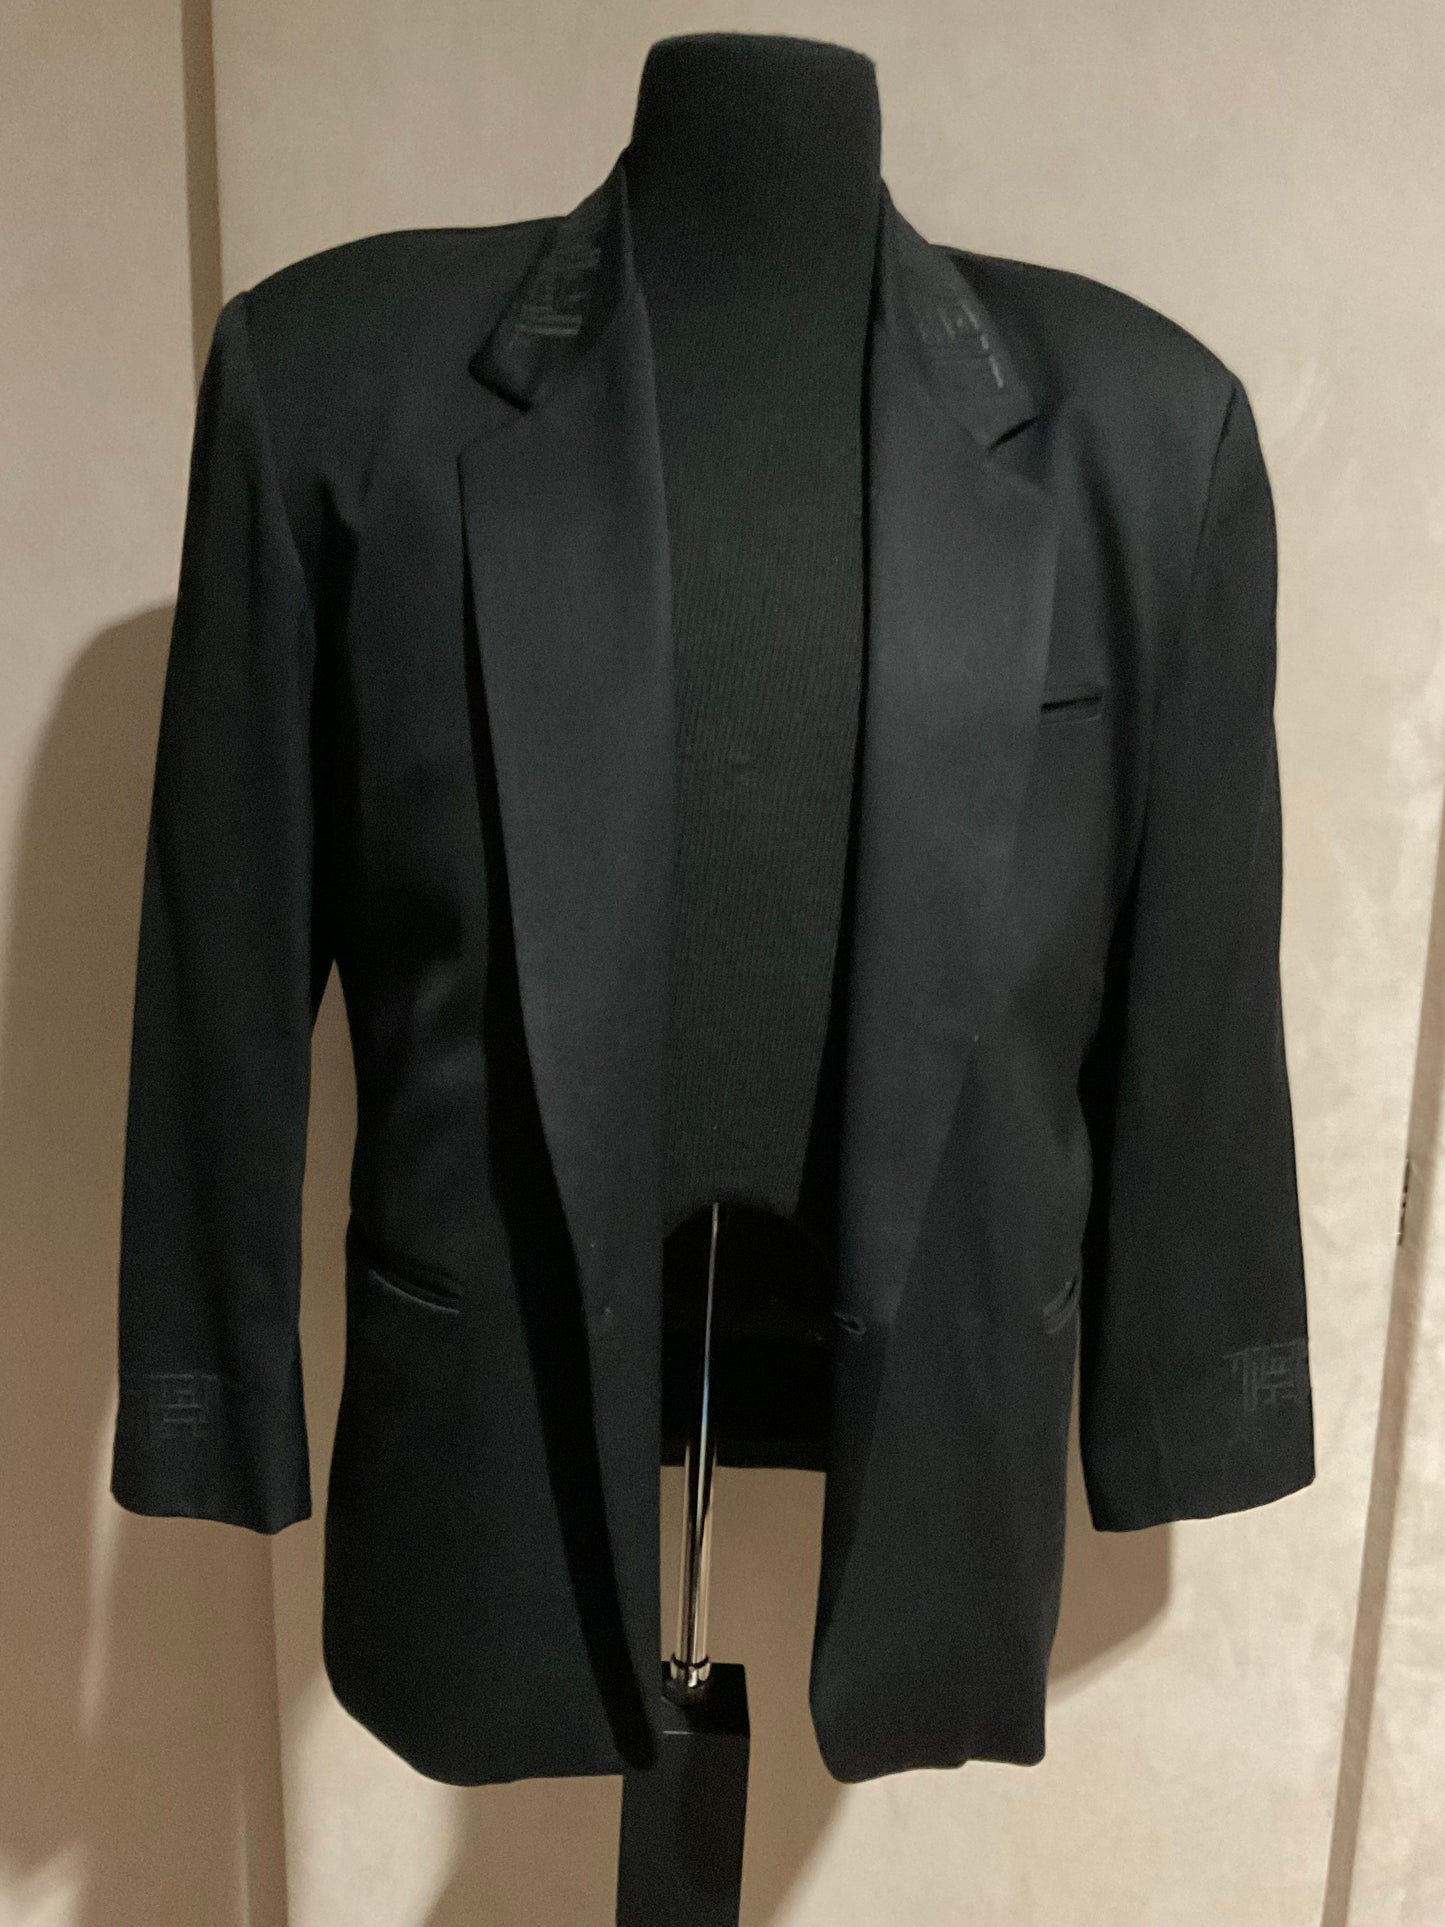 R P SUIT / BLACK EMBROIDERY DETAIL / 38 - 40 / MADE IN ITALY